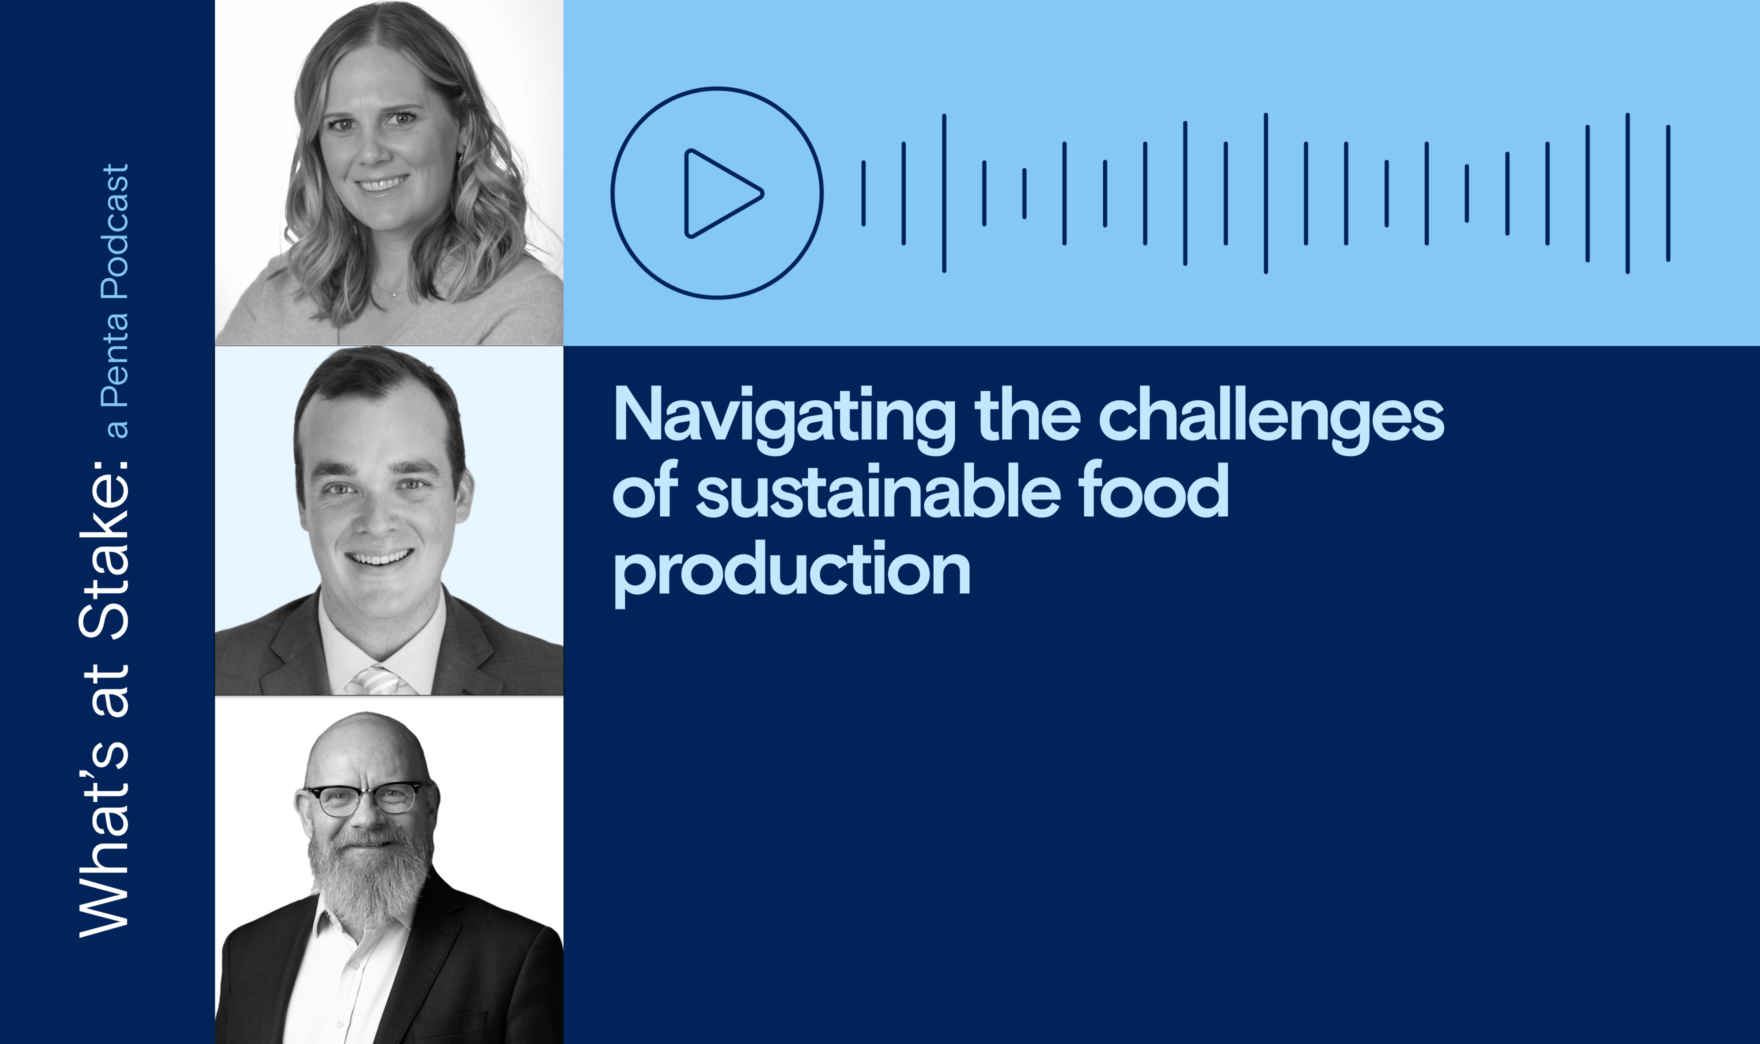 Navigating the challenges of sustainable food production